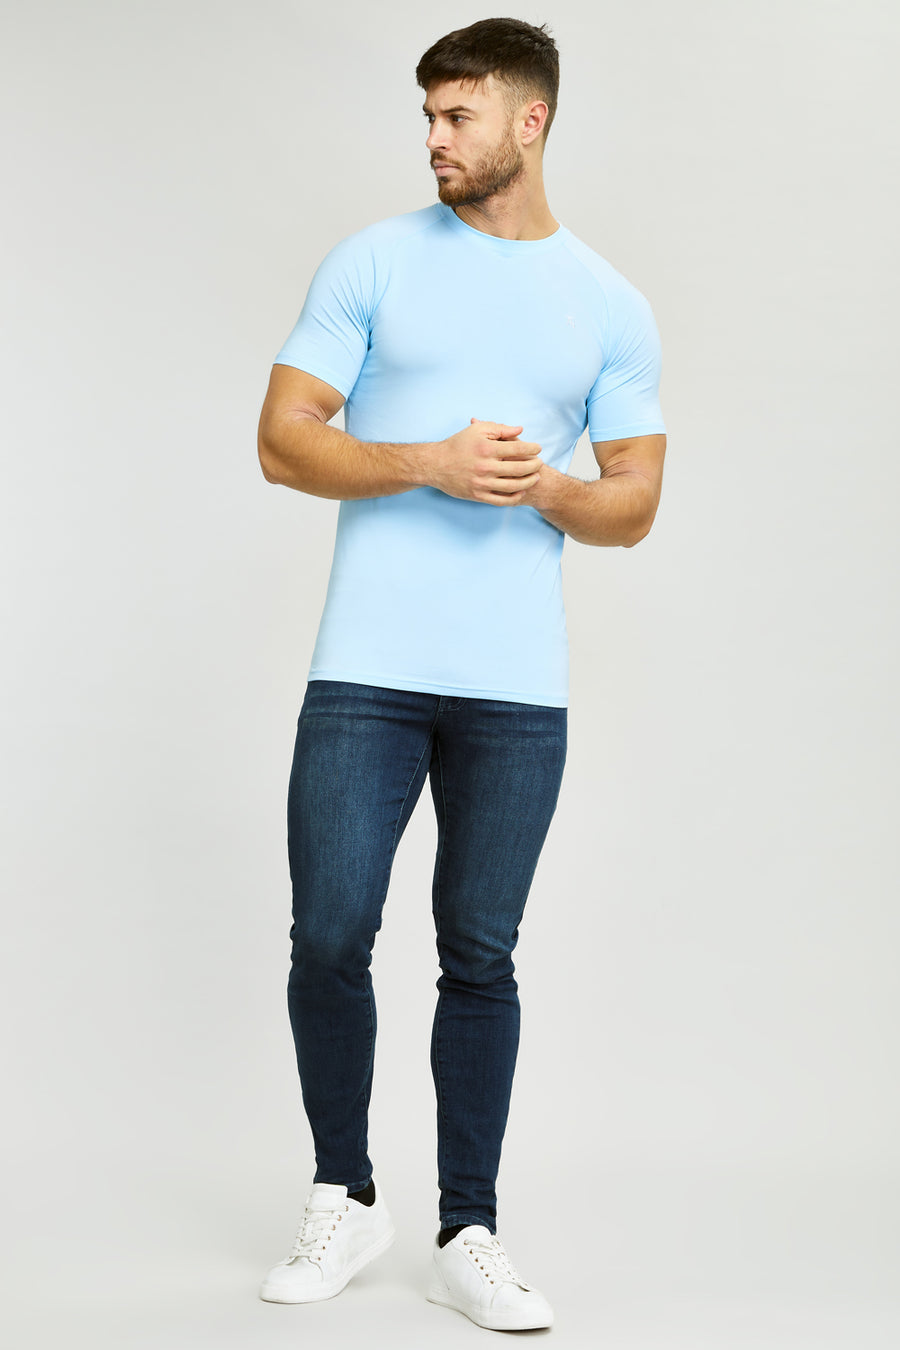 Premium Athletic Fit T-Shirt in Sky Blue - TAILORED ATHLETE - USA